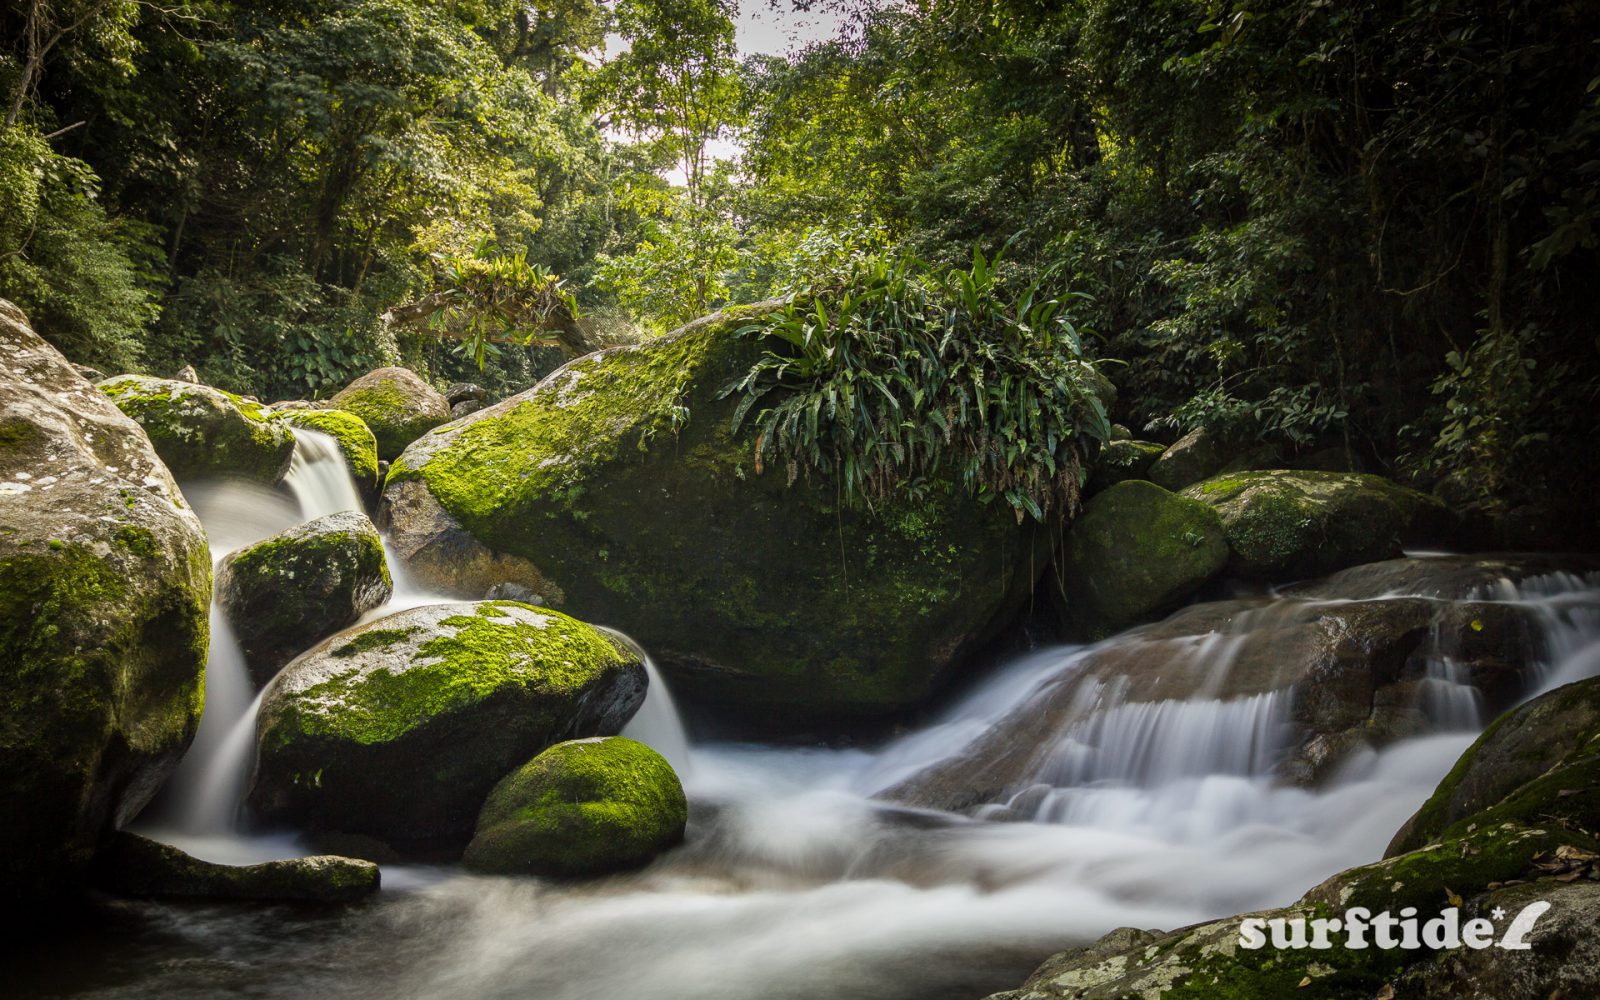 Long exposure photo of water cascading over moss-covered rocks at Cachoeira da Laje, Ilhabela in Brazil